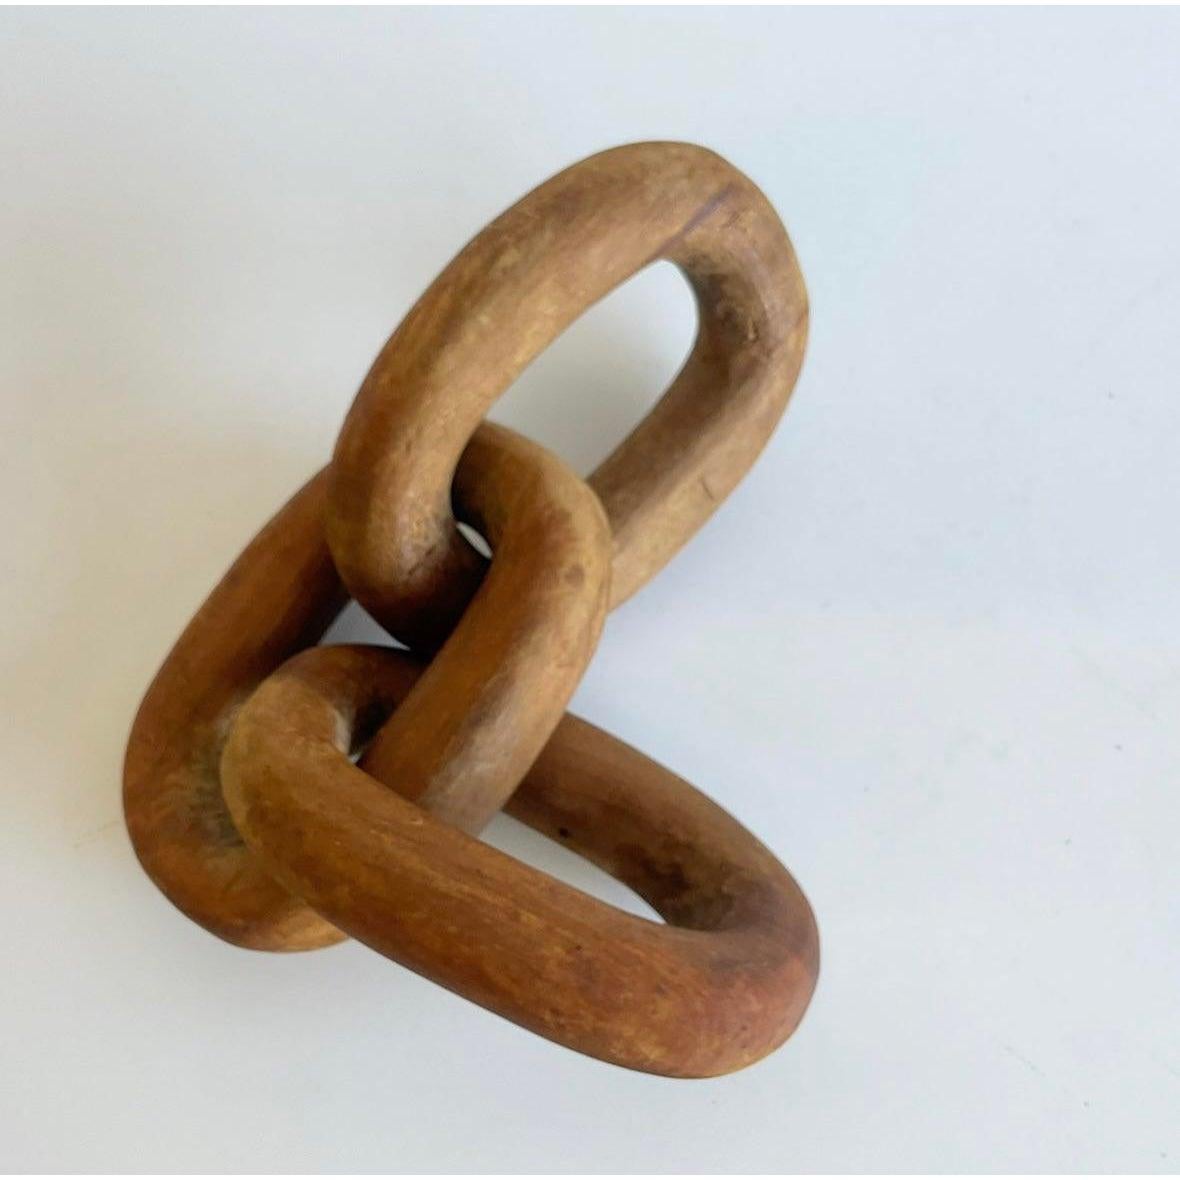 Incredible vintage Boho chic wooden sculpture. Carved from a single piece of wood. Three separate rings that are connected. A really special piece. Acquired from a Palm Beach estate.